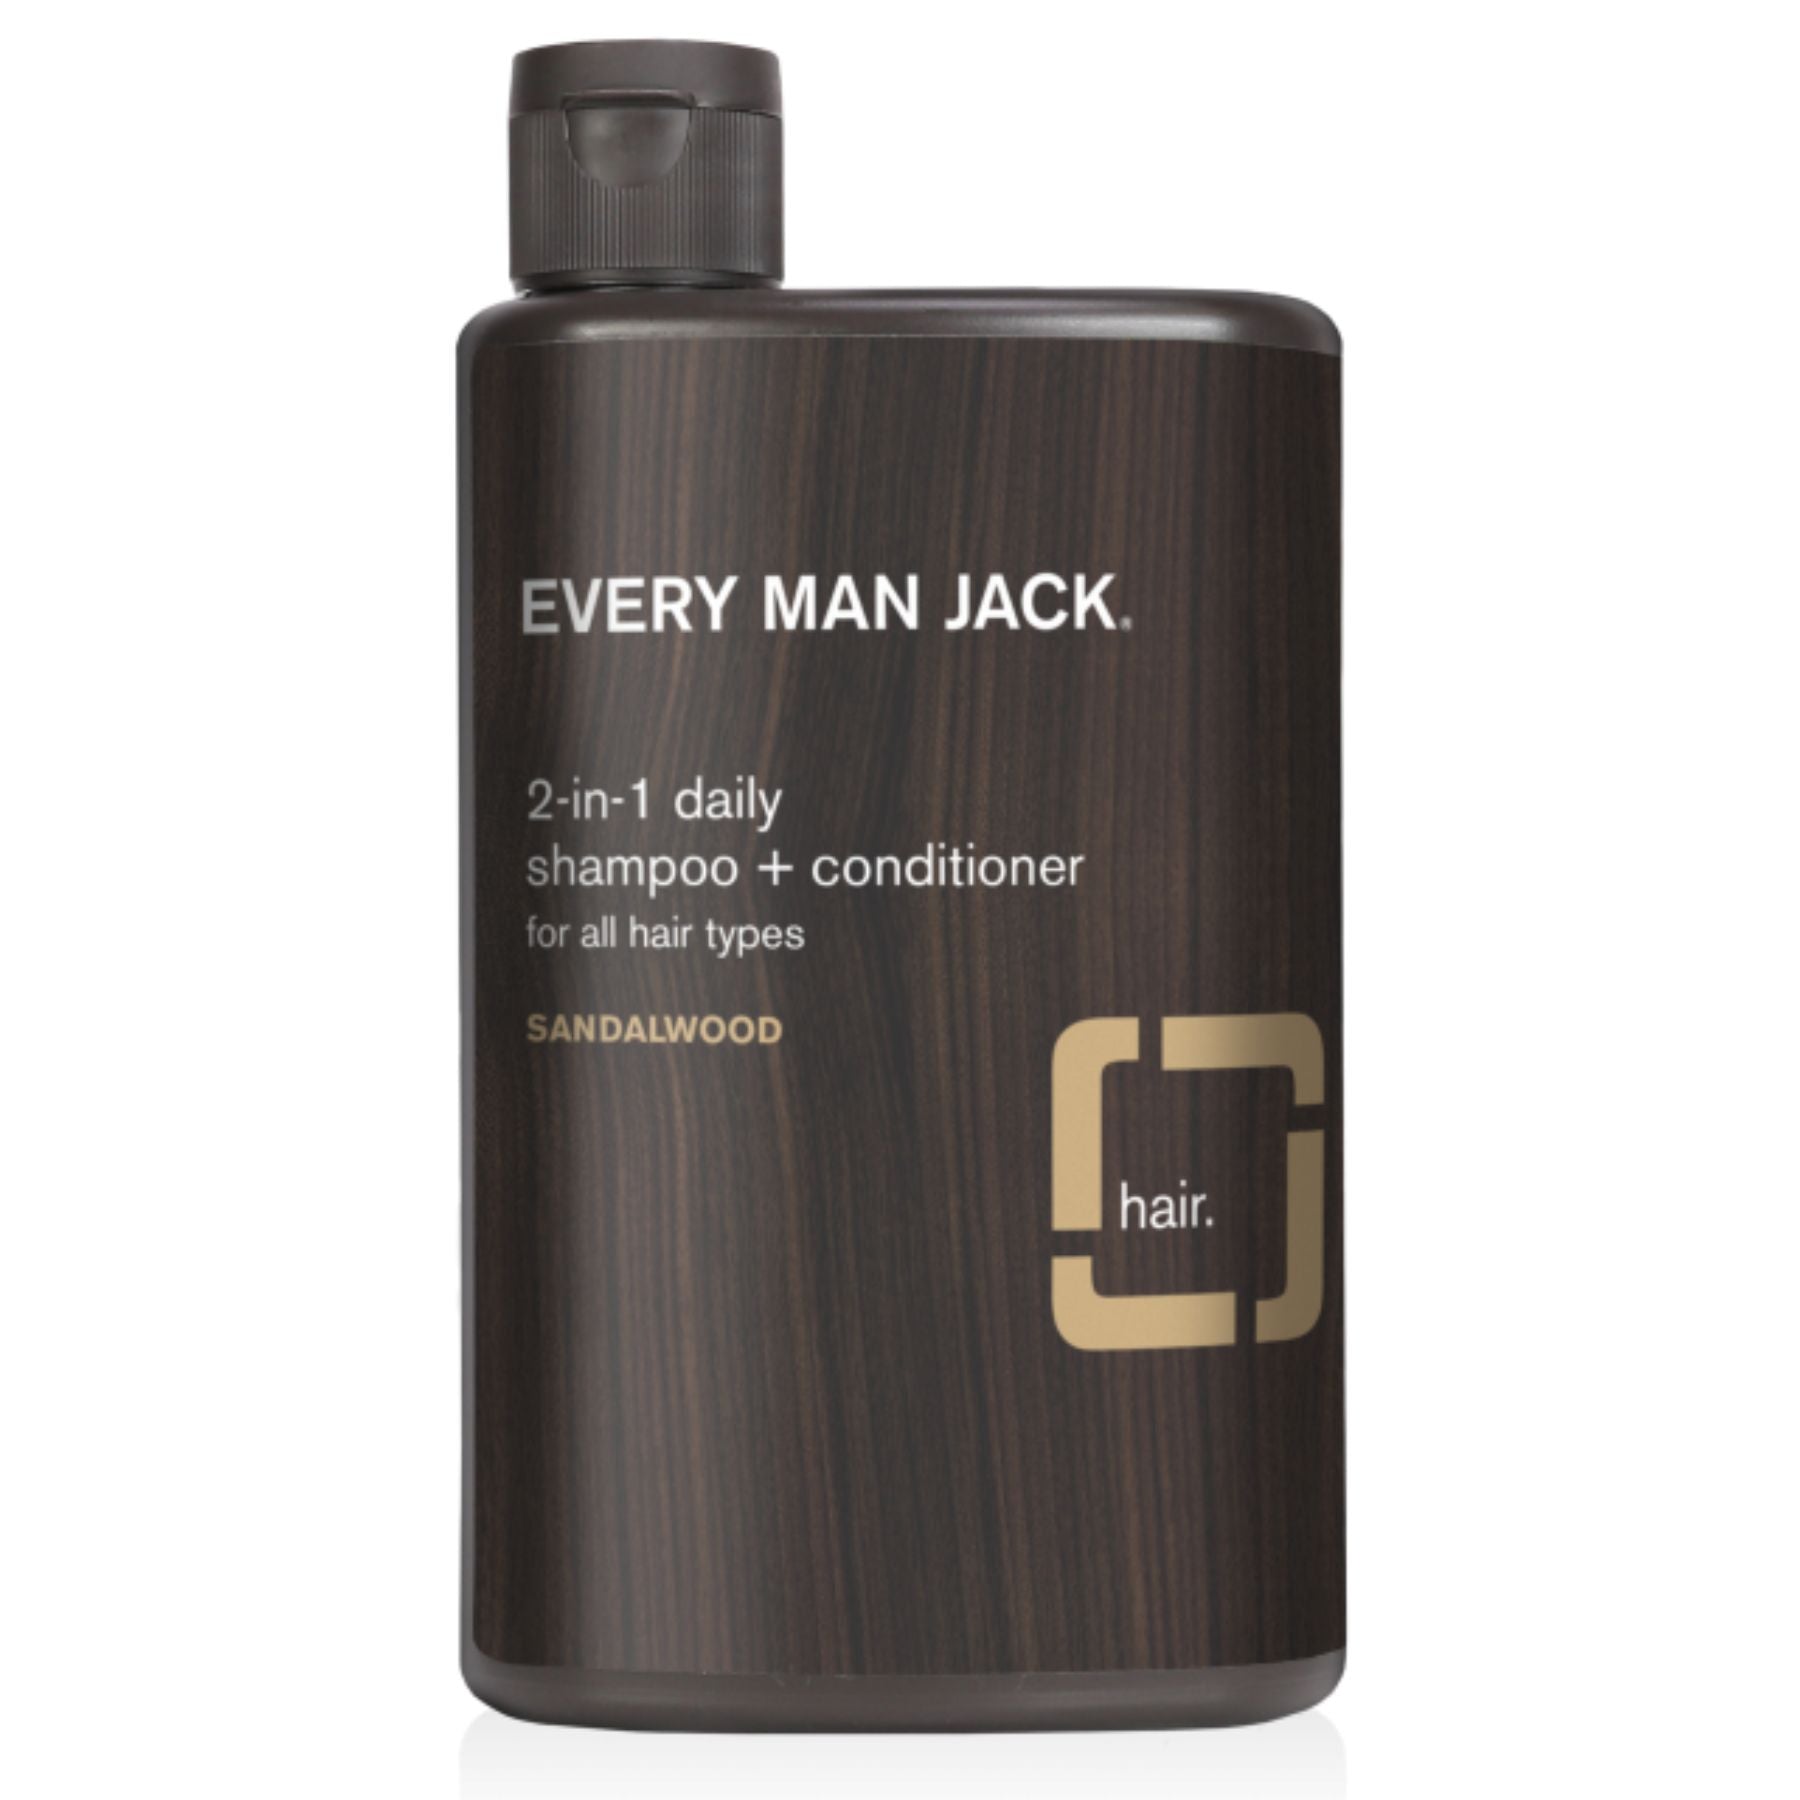 Every Man Jack 2-in-1 Sandalwood Shampoo and Conditioner 400ml